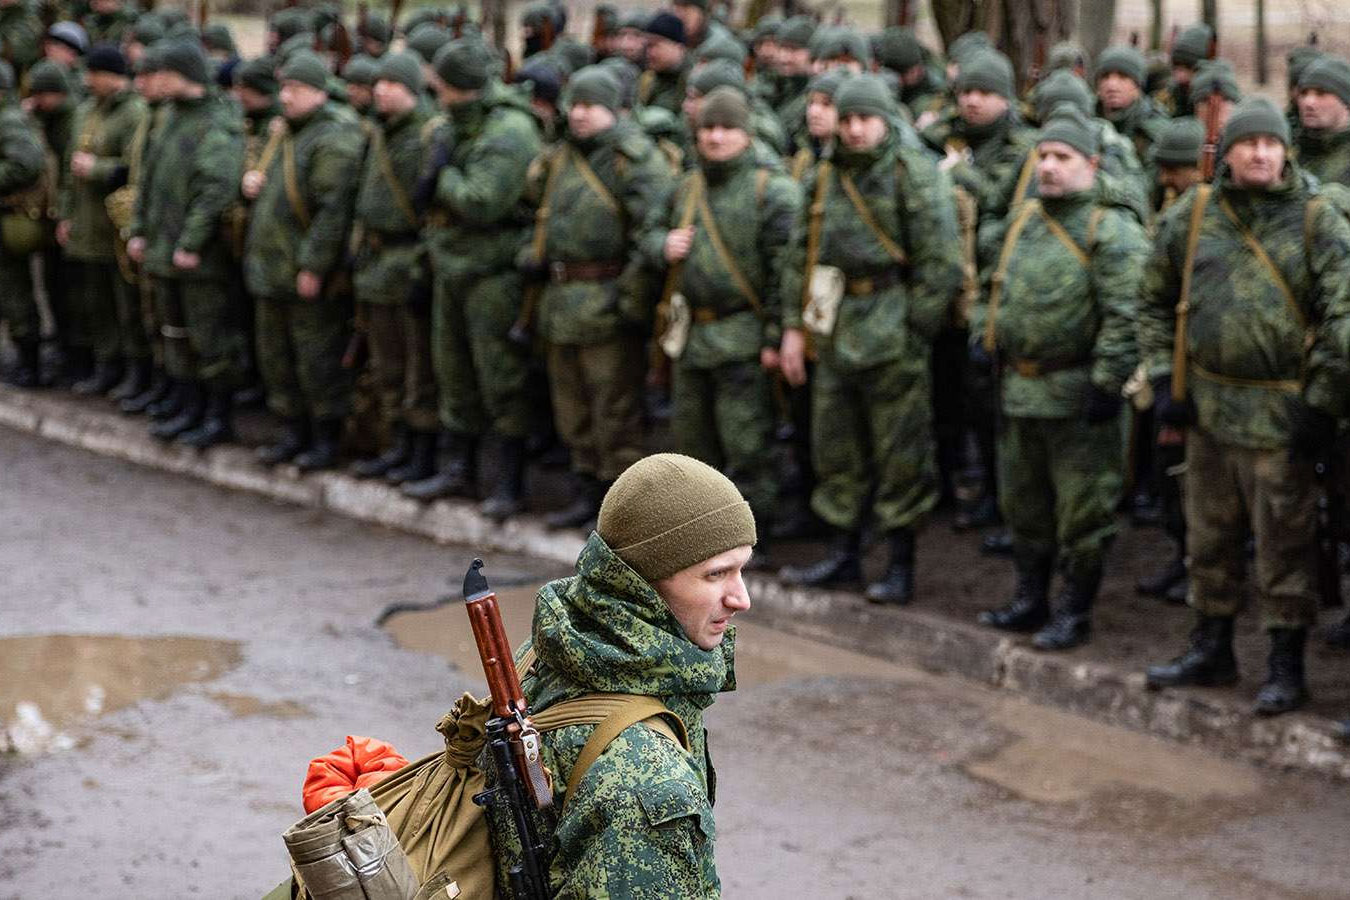 Military mobilization has resumed in Russia